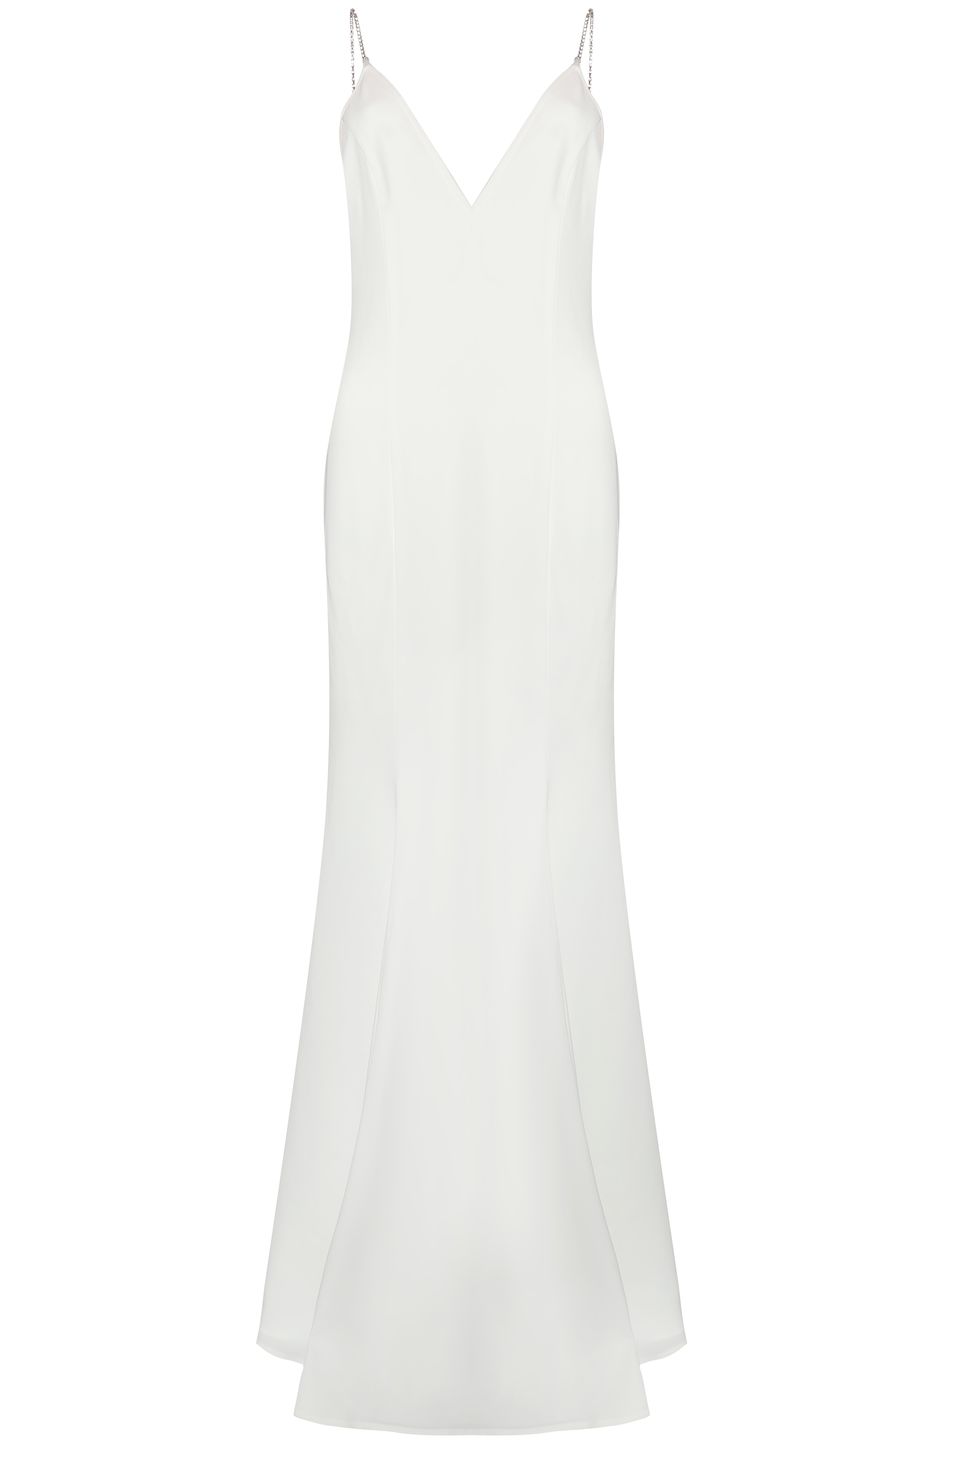 Missguided bridal